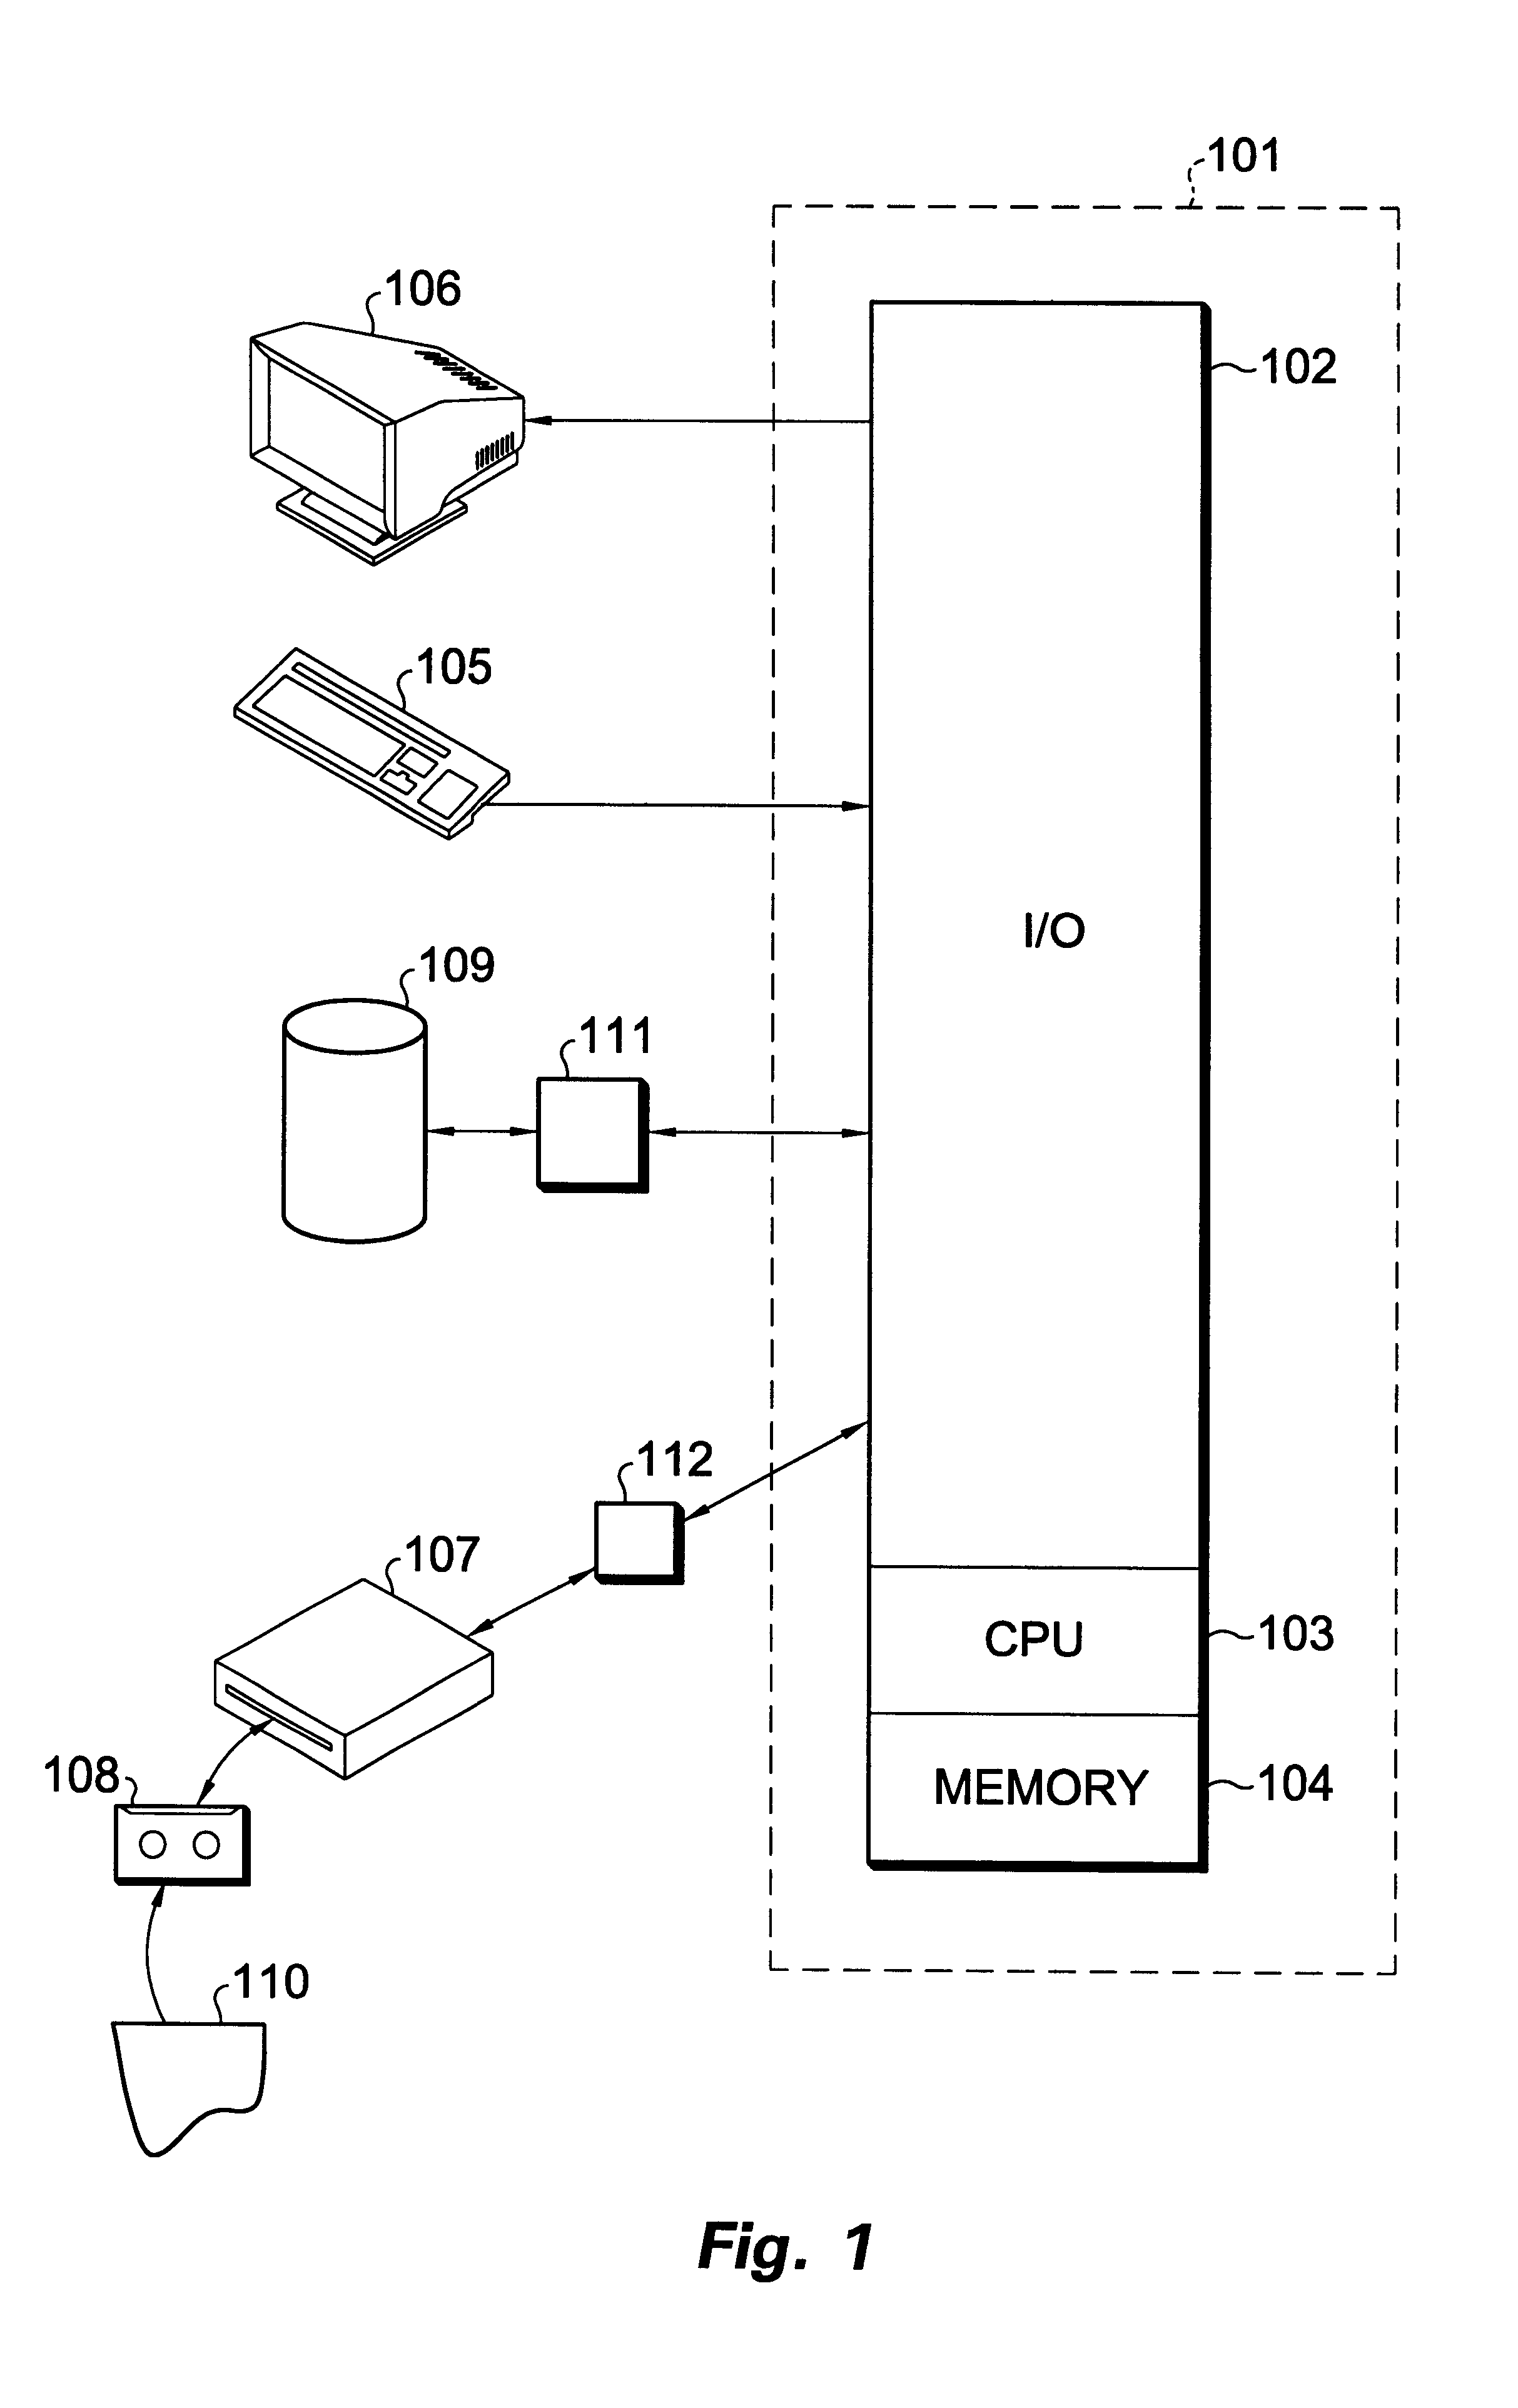 Hardware assisted formatted data transfer system having a source storage controller and a formatting storage controller receiving on-media structure definition and a data definition